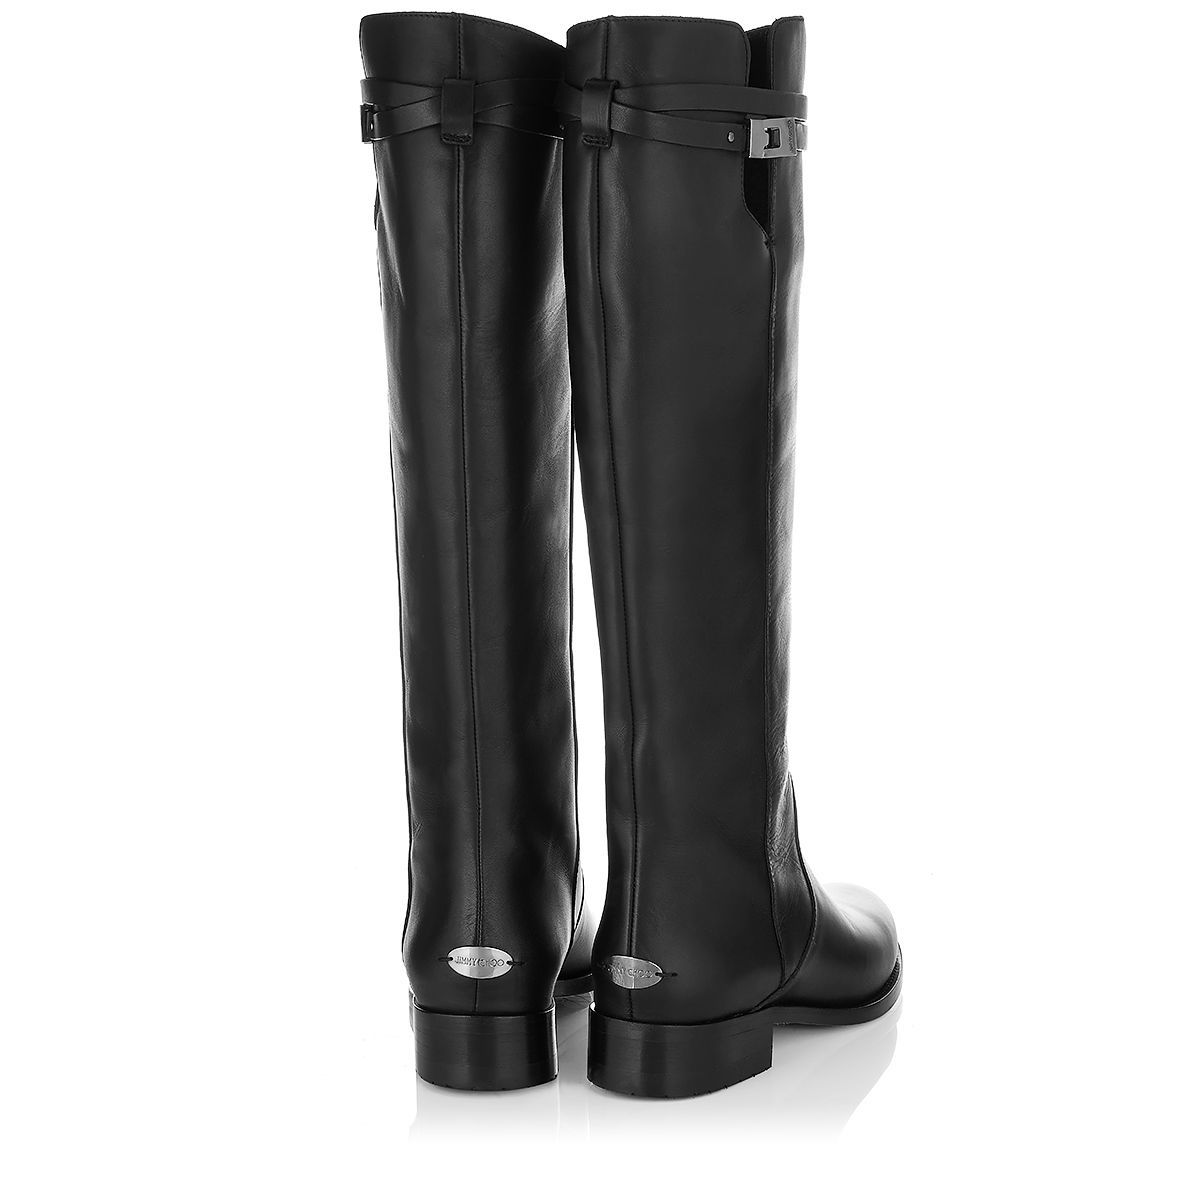 Jimmy choo 50/50 Stretch Leather & Suede Knee-High Boots in Black | Lyst